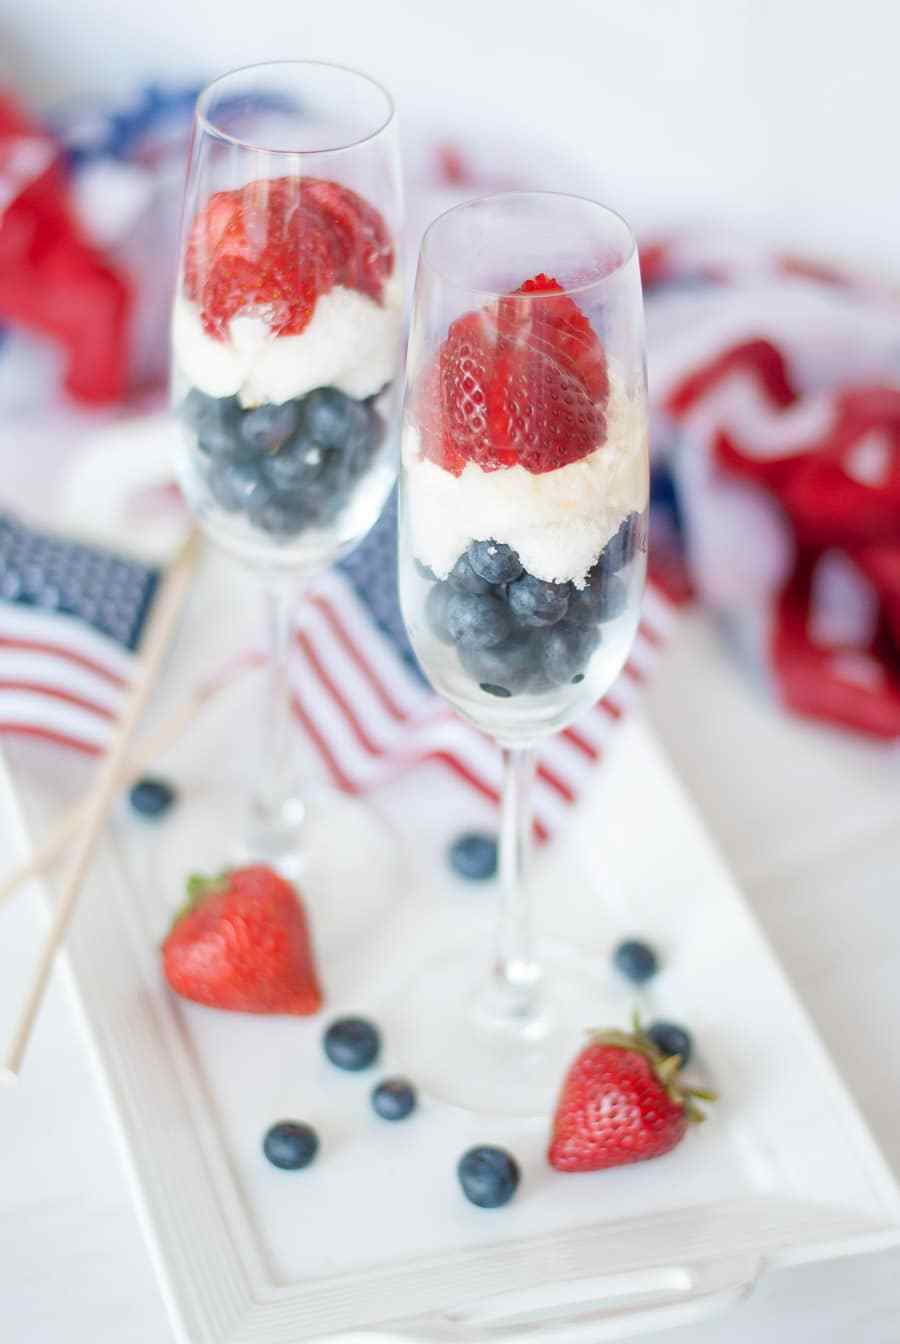  Easy Last Minute 4th of July Cookout Recipes; Pictured:  Patriotic Dessert Parfait with Summer Berries and Lemon Whipped Cream  by Champagne and Paper Planes 